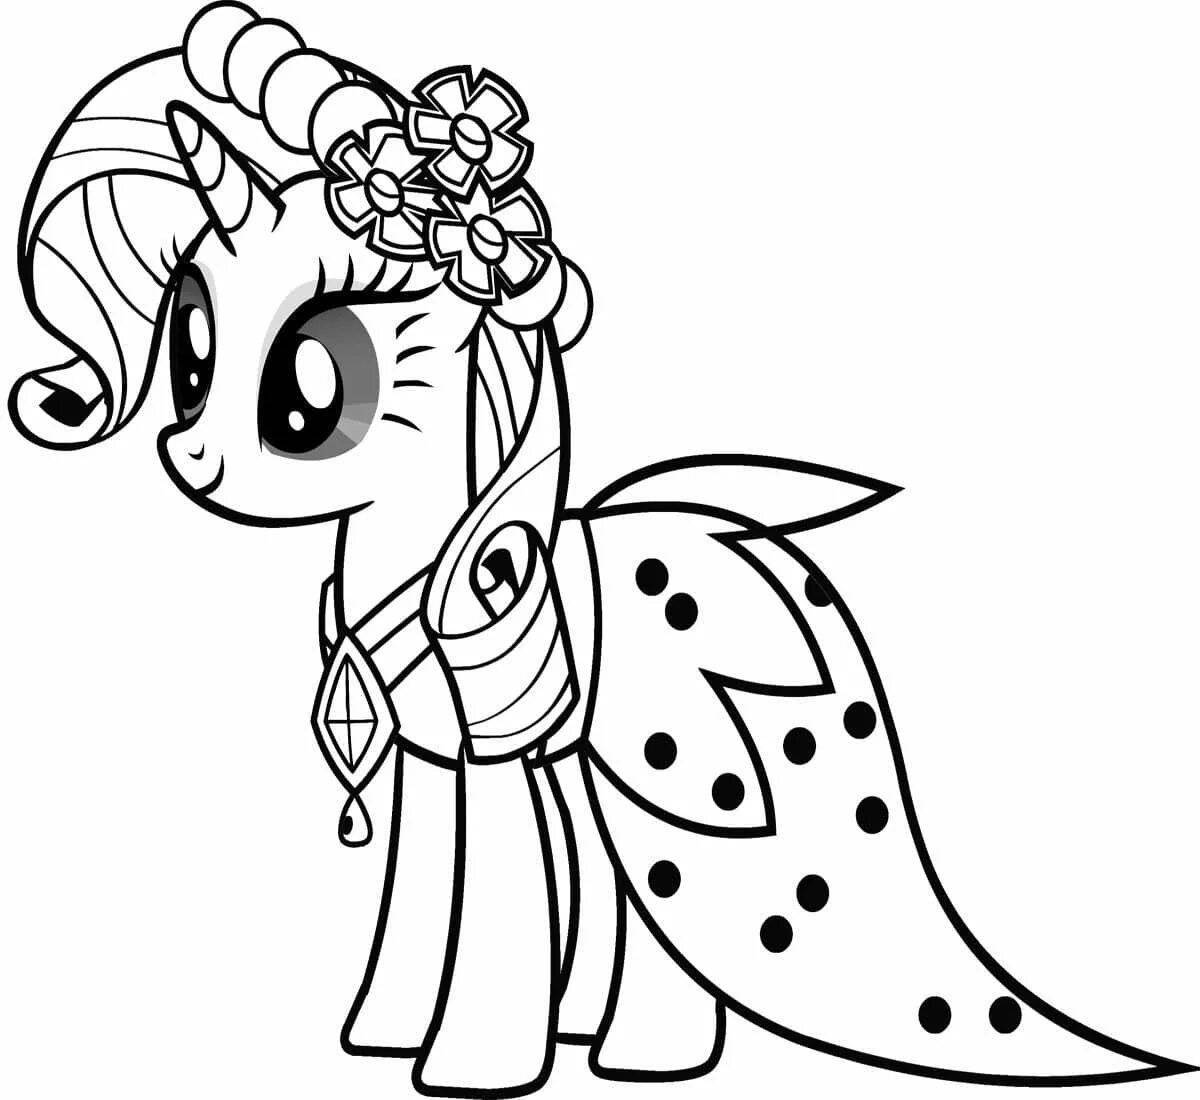 Exquisite pony coloring book for girls